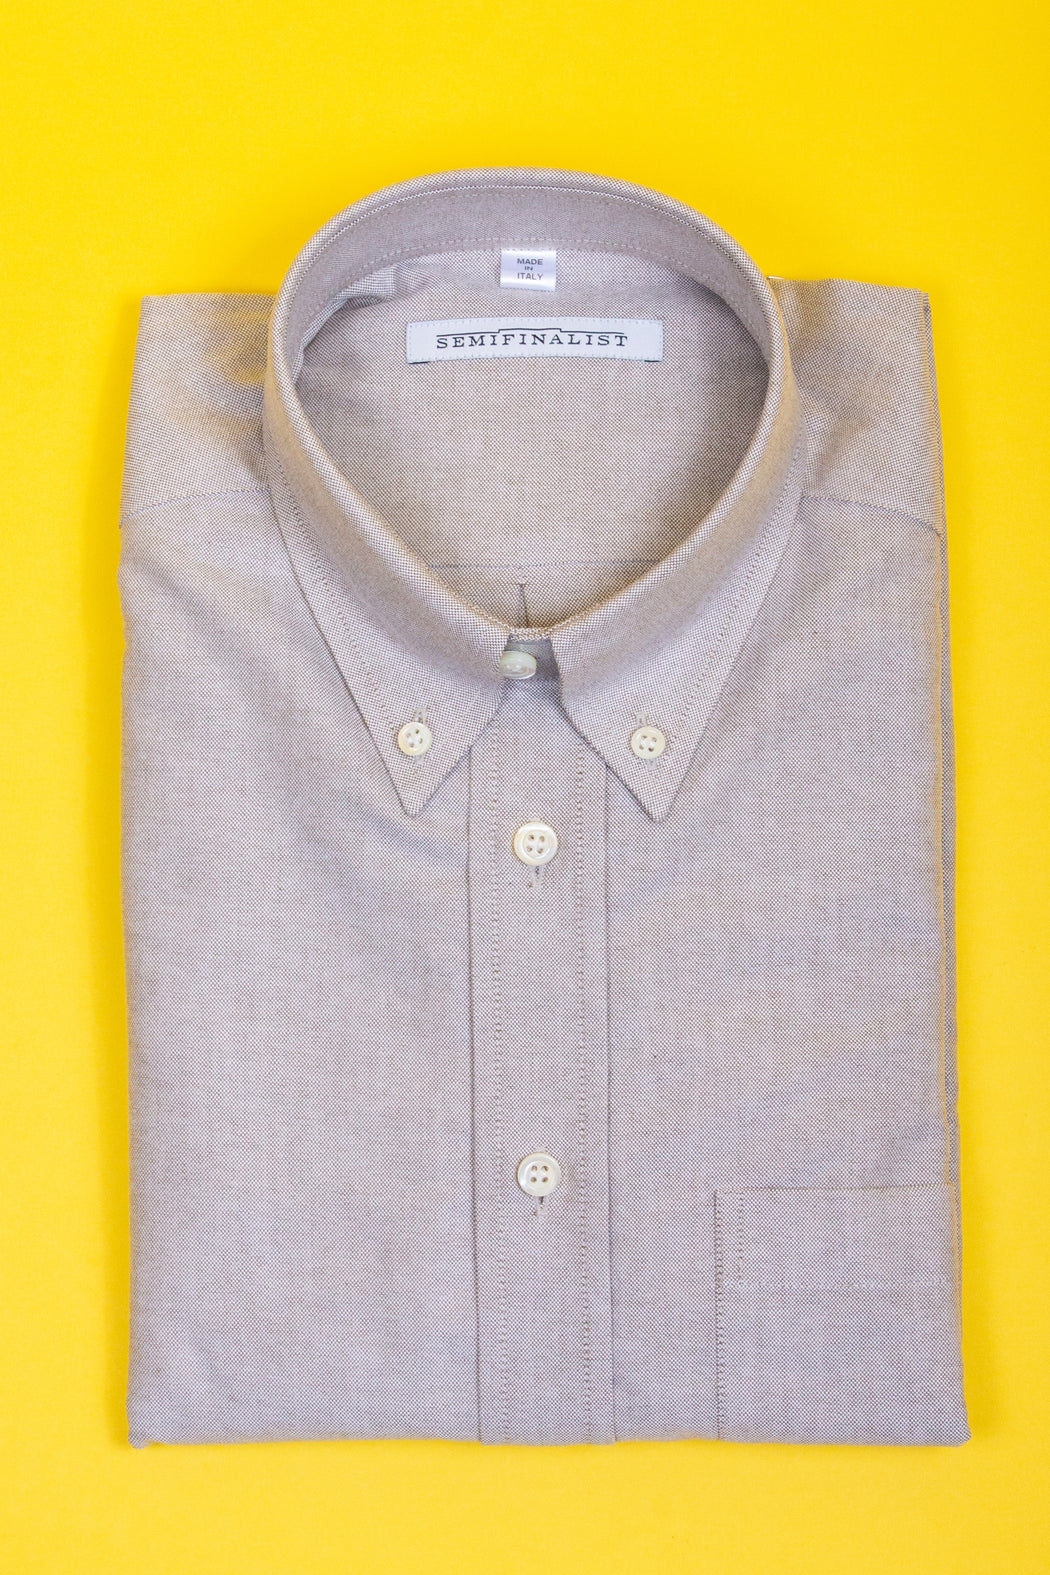 Sage colored button-down collar shirt, folded